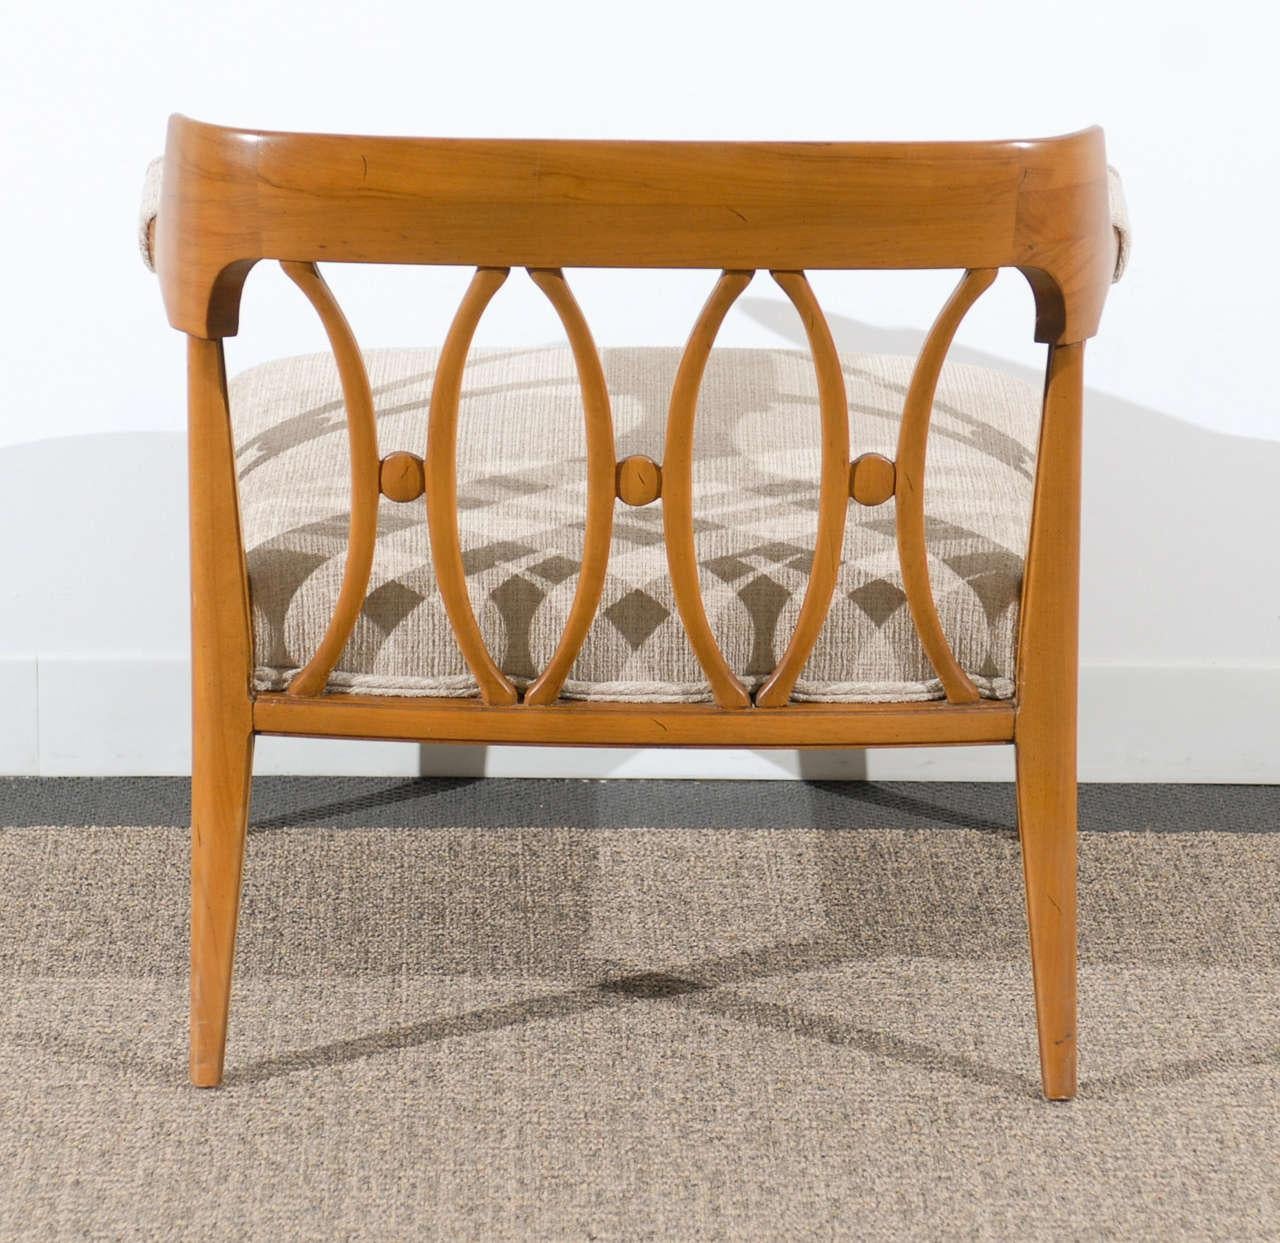 American Modern Neoclassical Loungers by Lubberts and Mulder for Tomlinson, circa 1958 For Sale